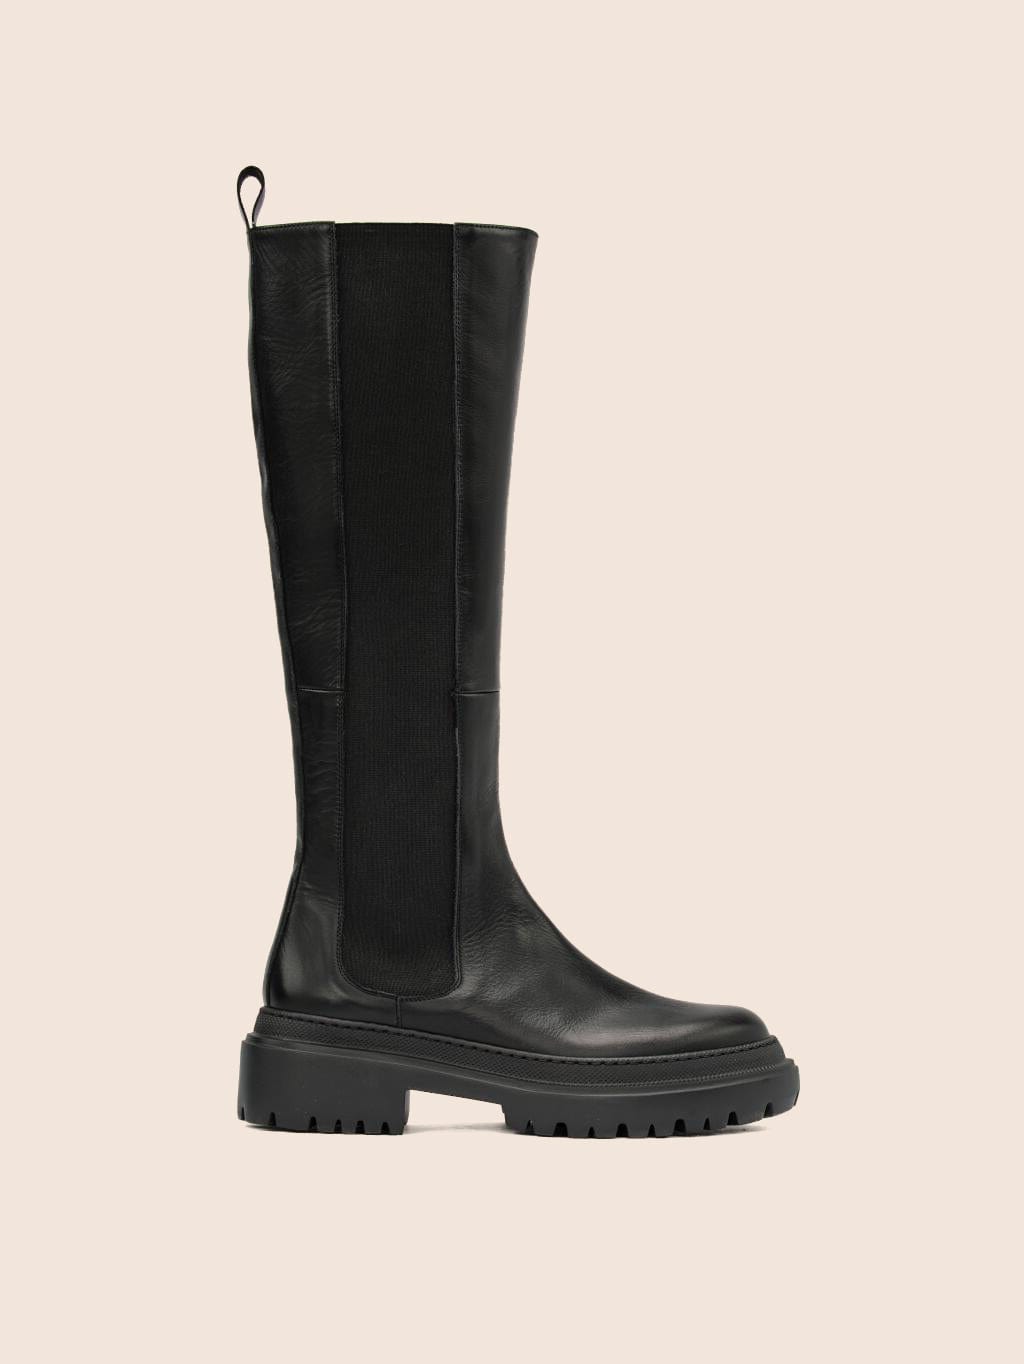 Maguire Monza Leather Knee-High Boots - Black